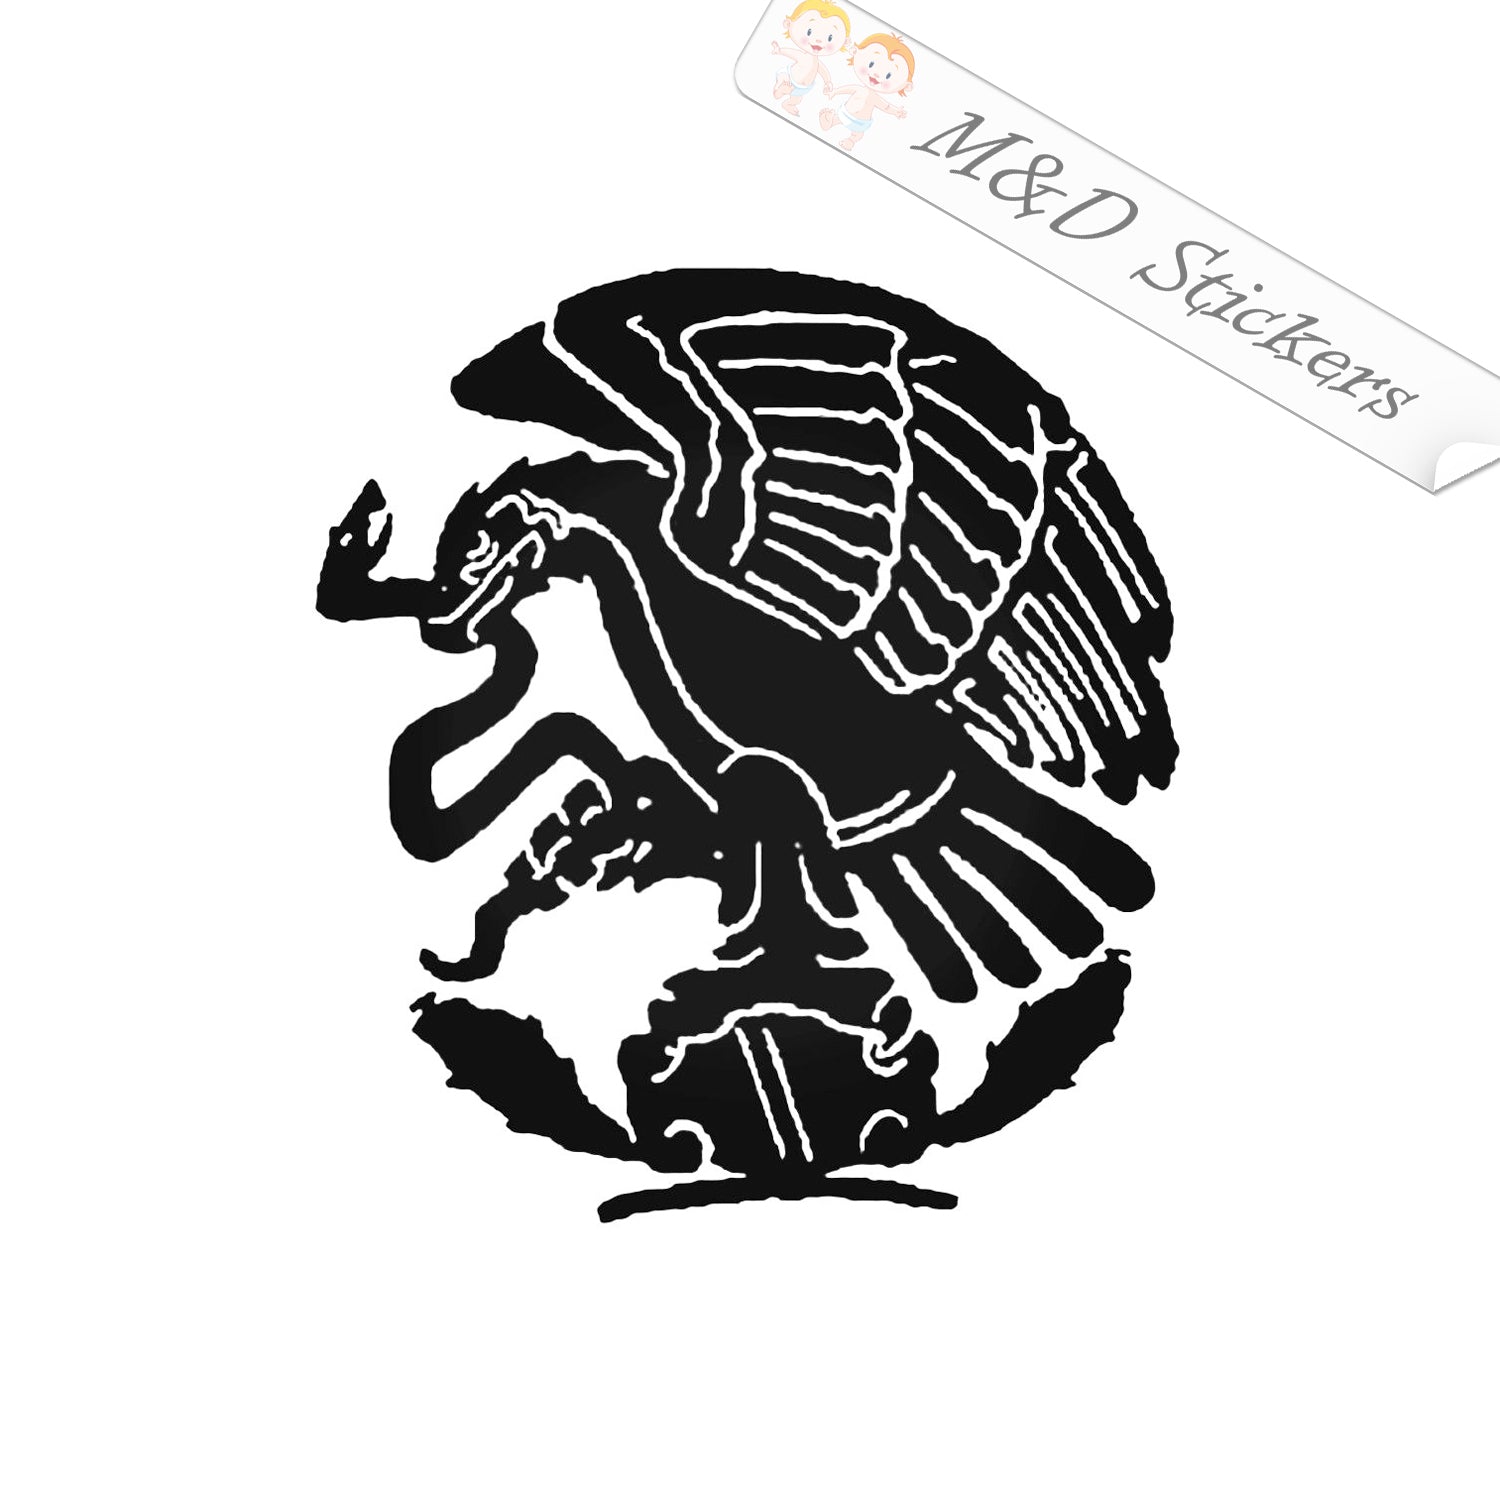 Mexico Flag Decal Mexican Eagle Flag Car Decal Sticker Set of 2 R&L #319